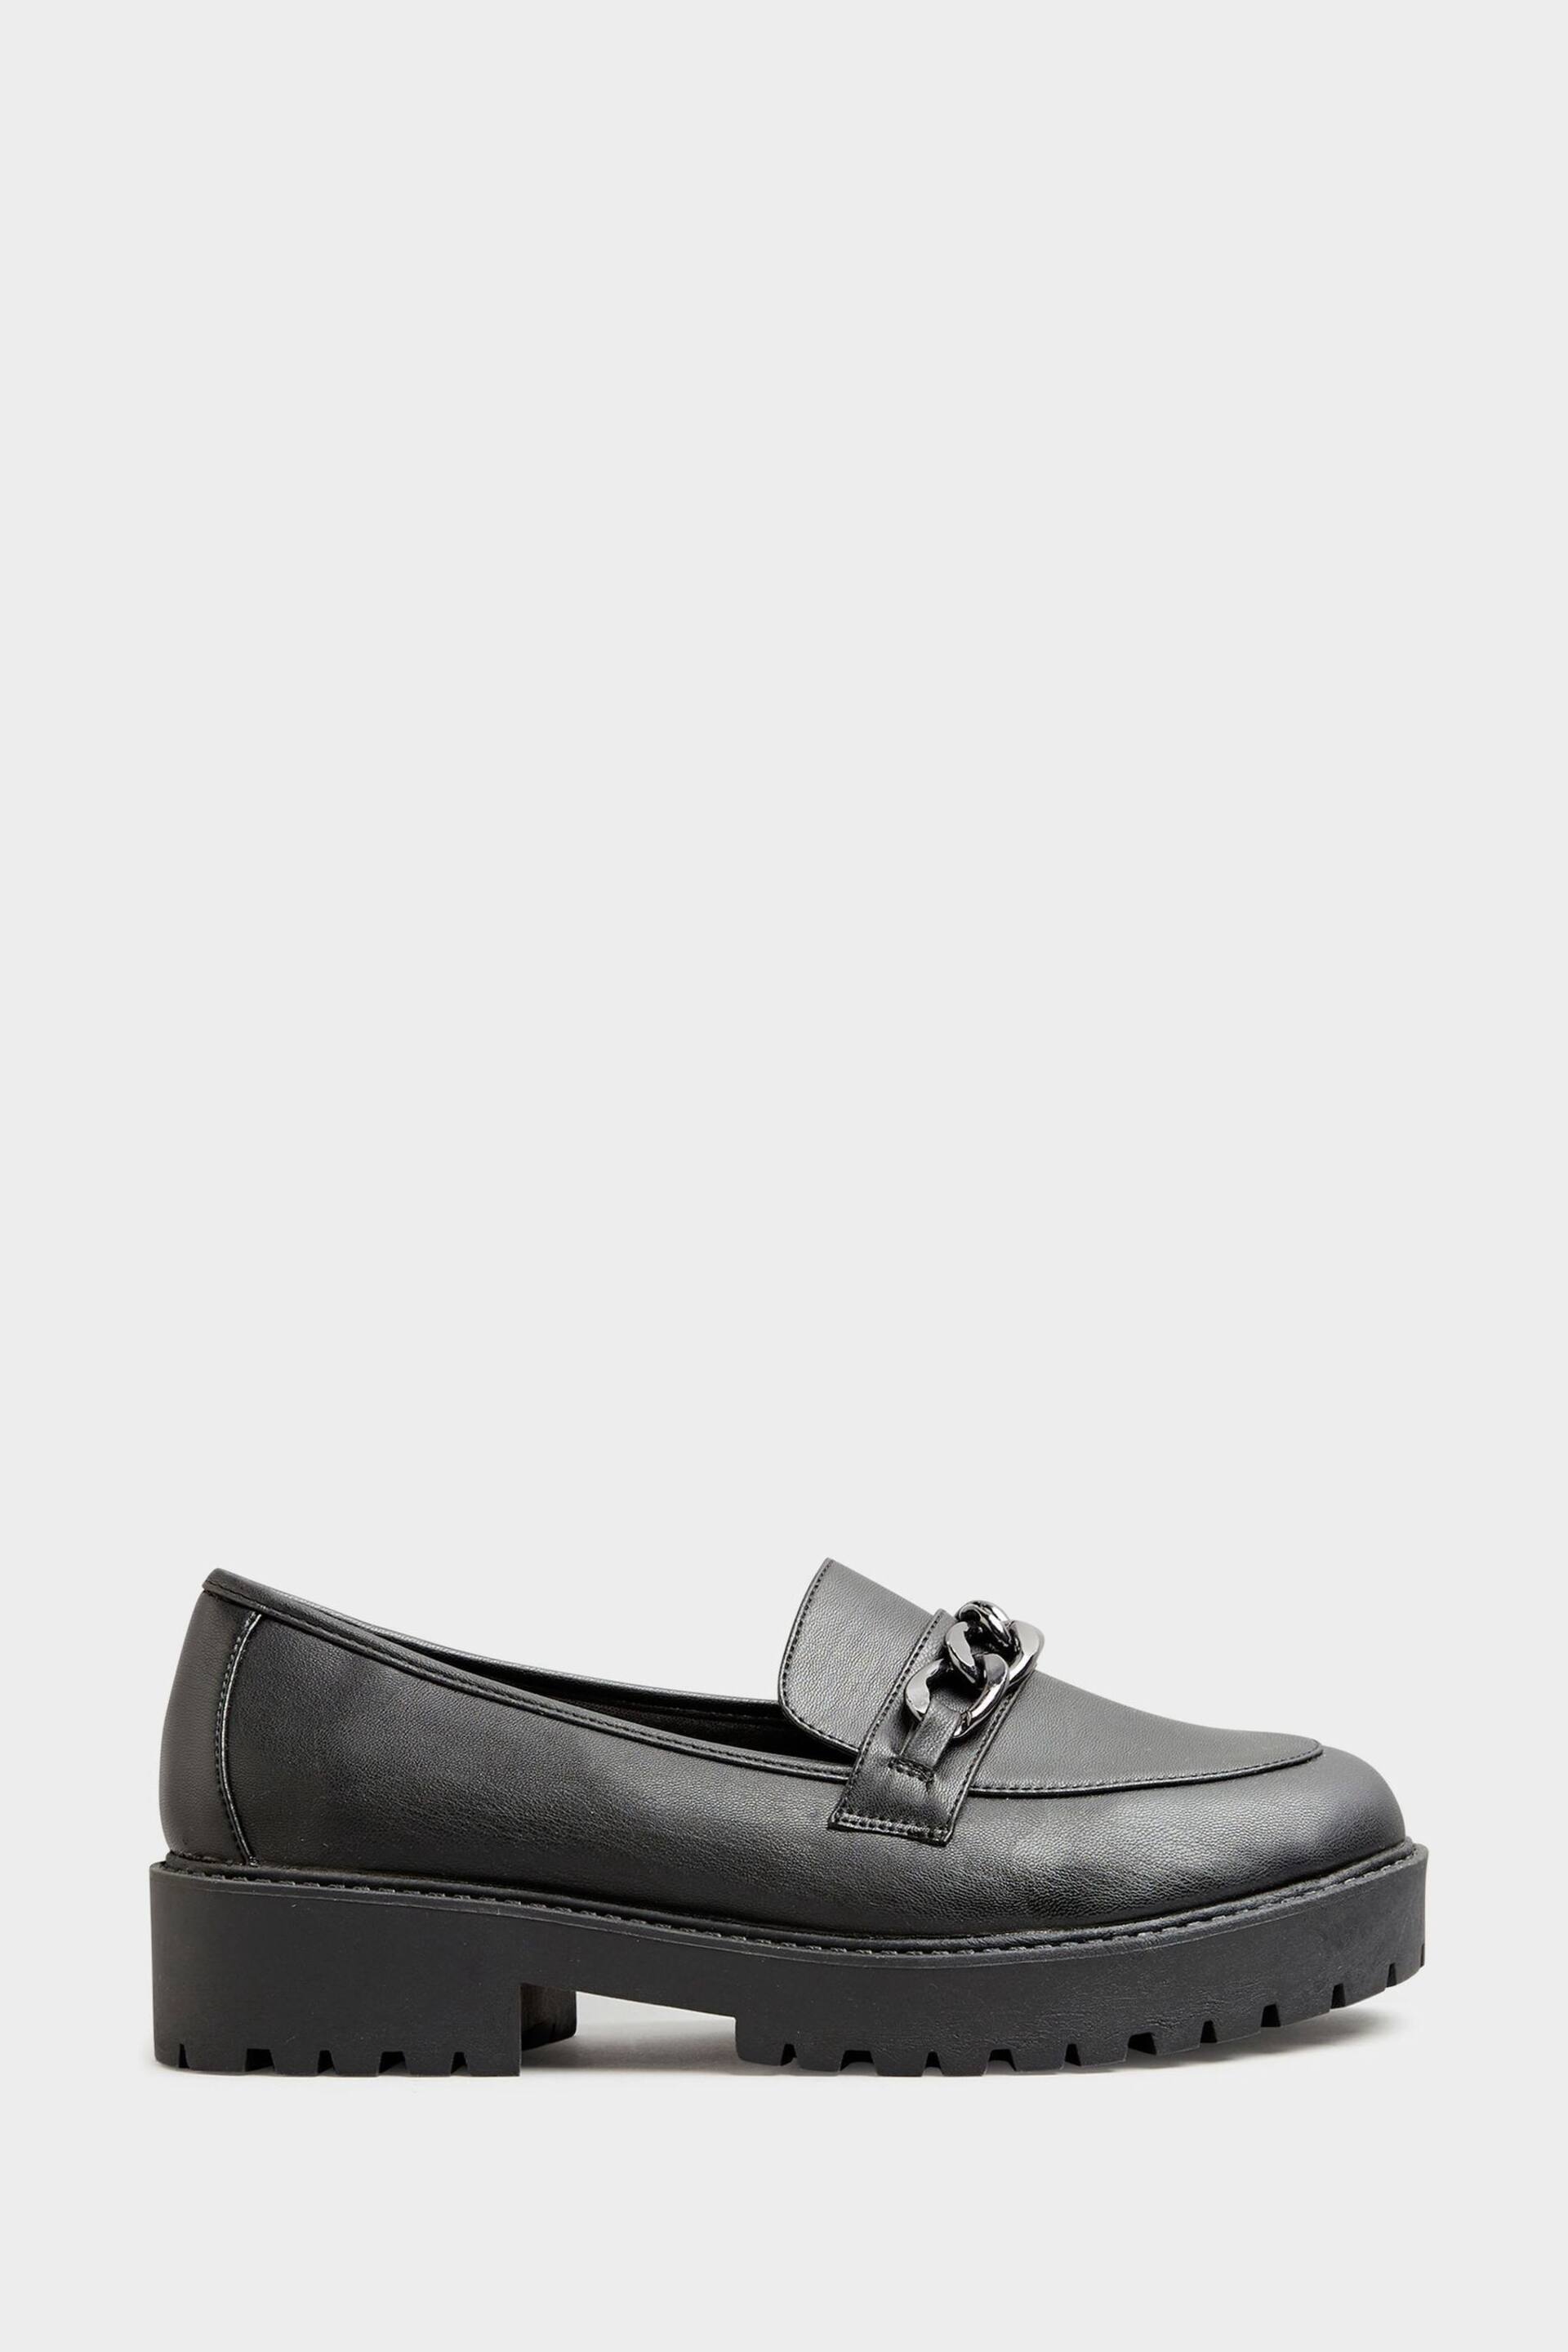 Yours Curve Black Wide FIt Chunky Metal Trim Loafers - Image 2 of 4